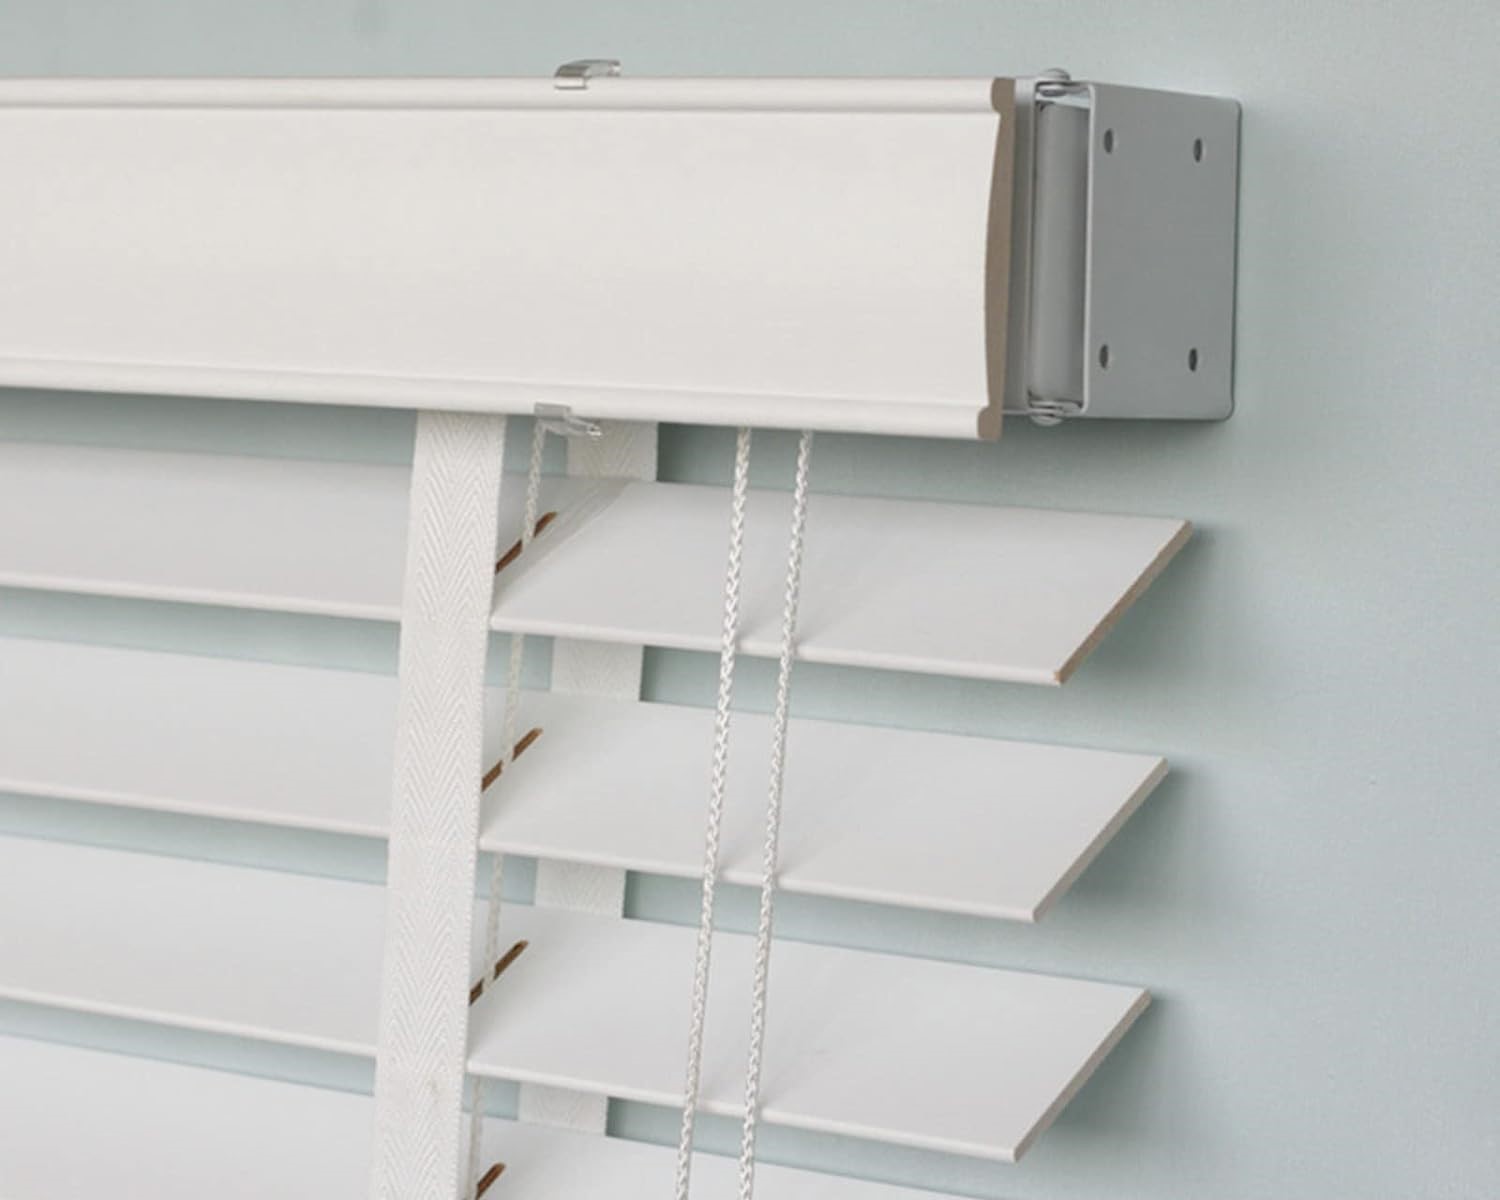 How To Take Down Blinds With Hidden Brackets